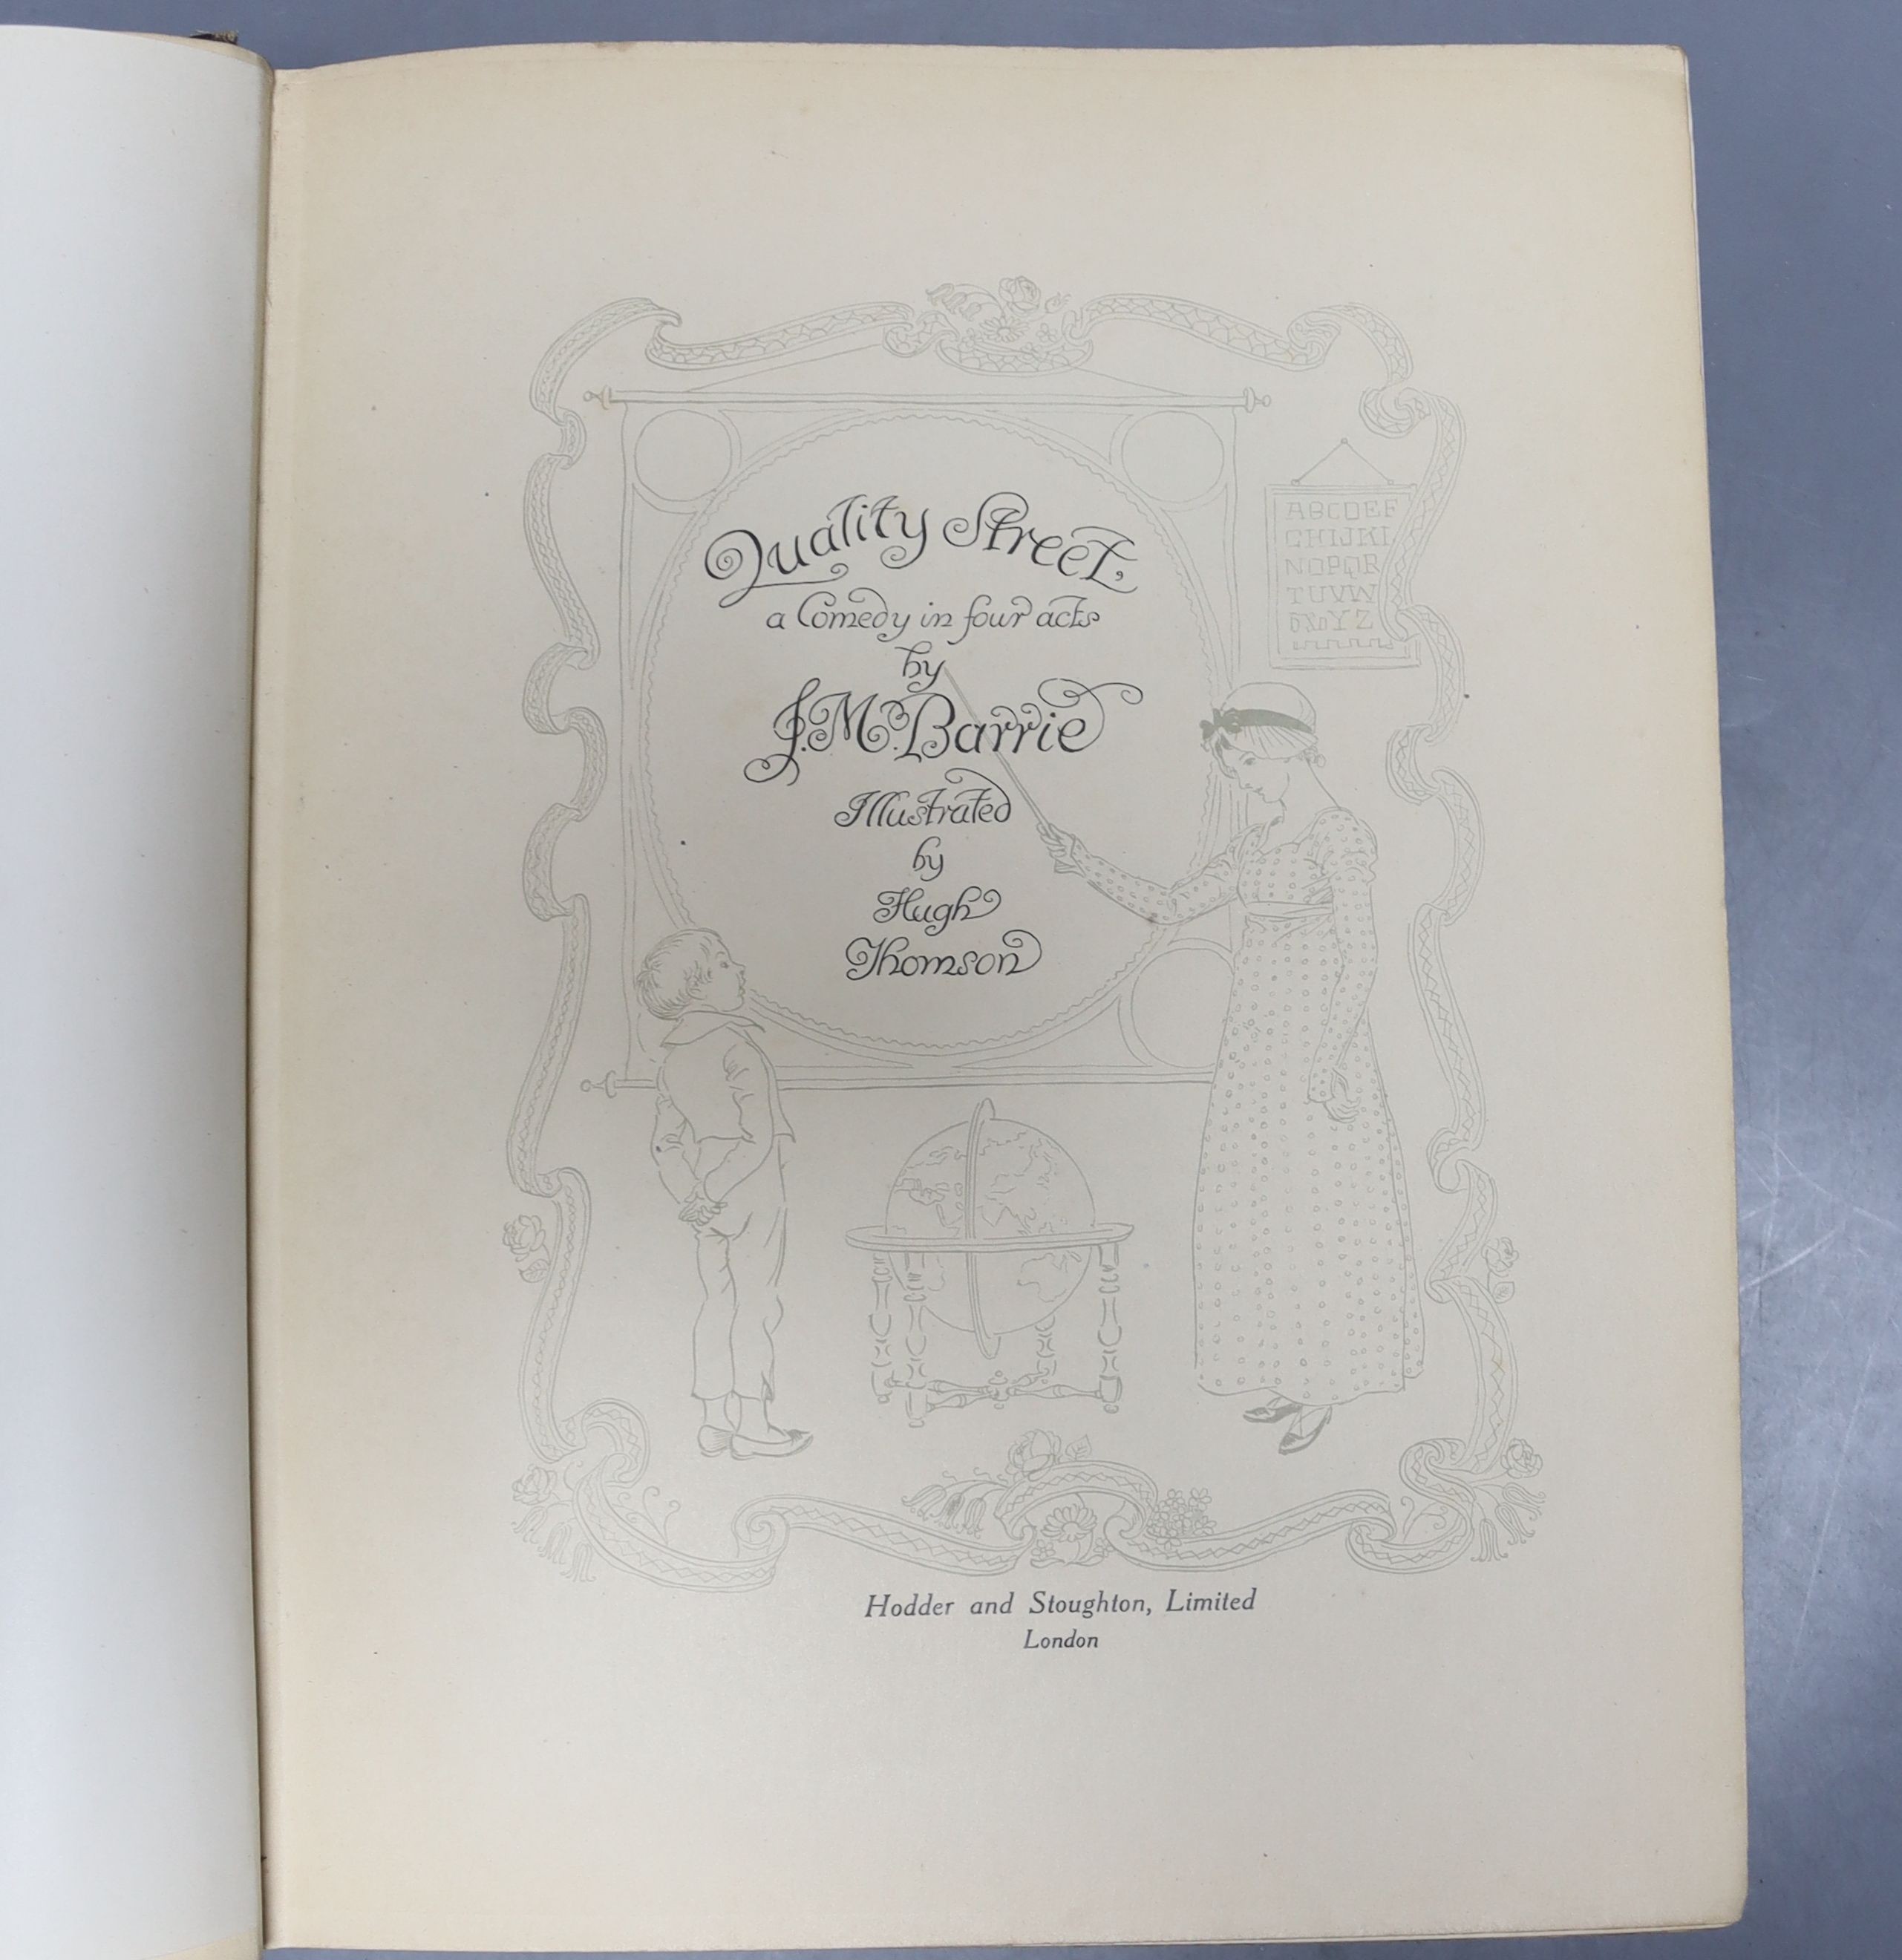 Barrie, J.M. Quality Street, illustrated by Hugh Thomson, and another, Society for Promoting Christian Knowledge, full calf